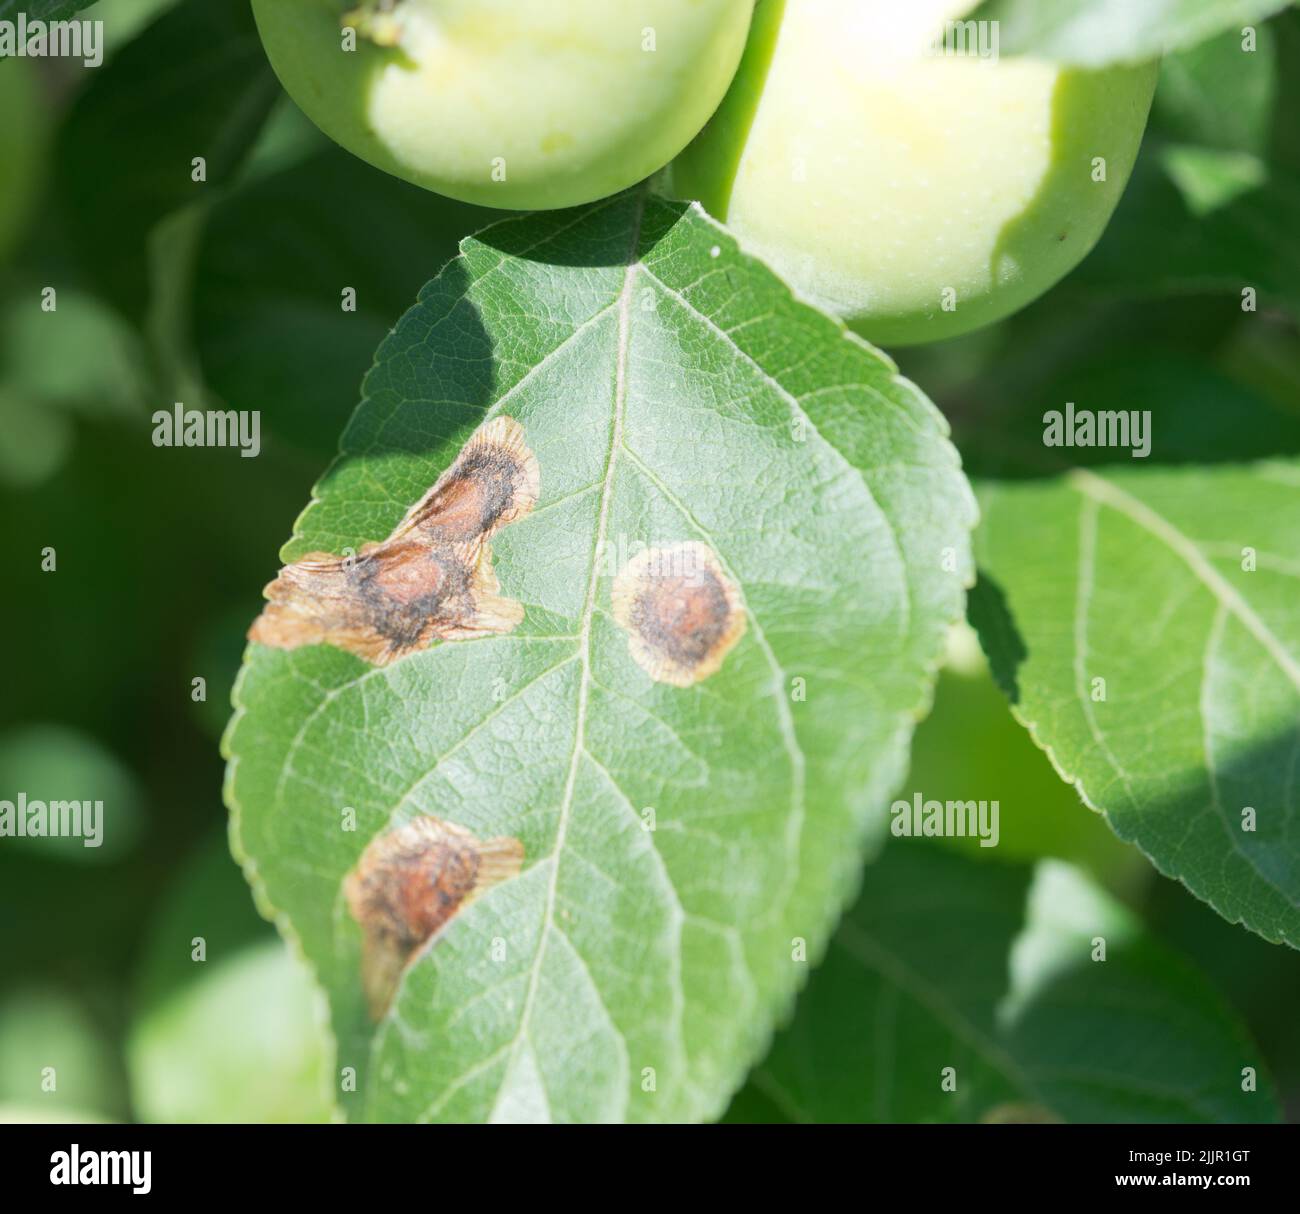 Close up shot of scab on apple leaf Stock Photo